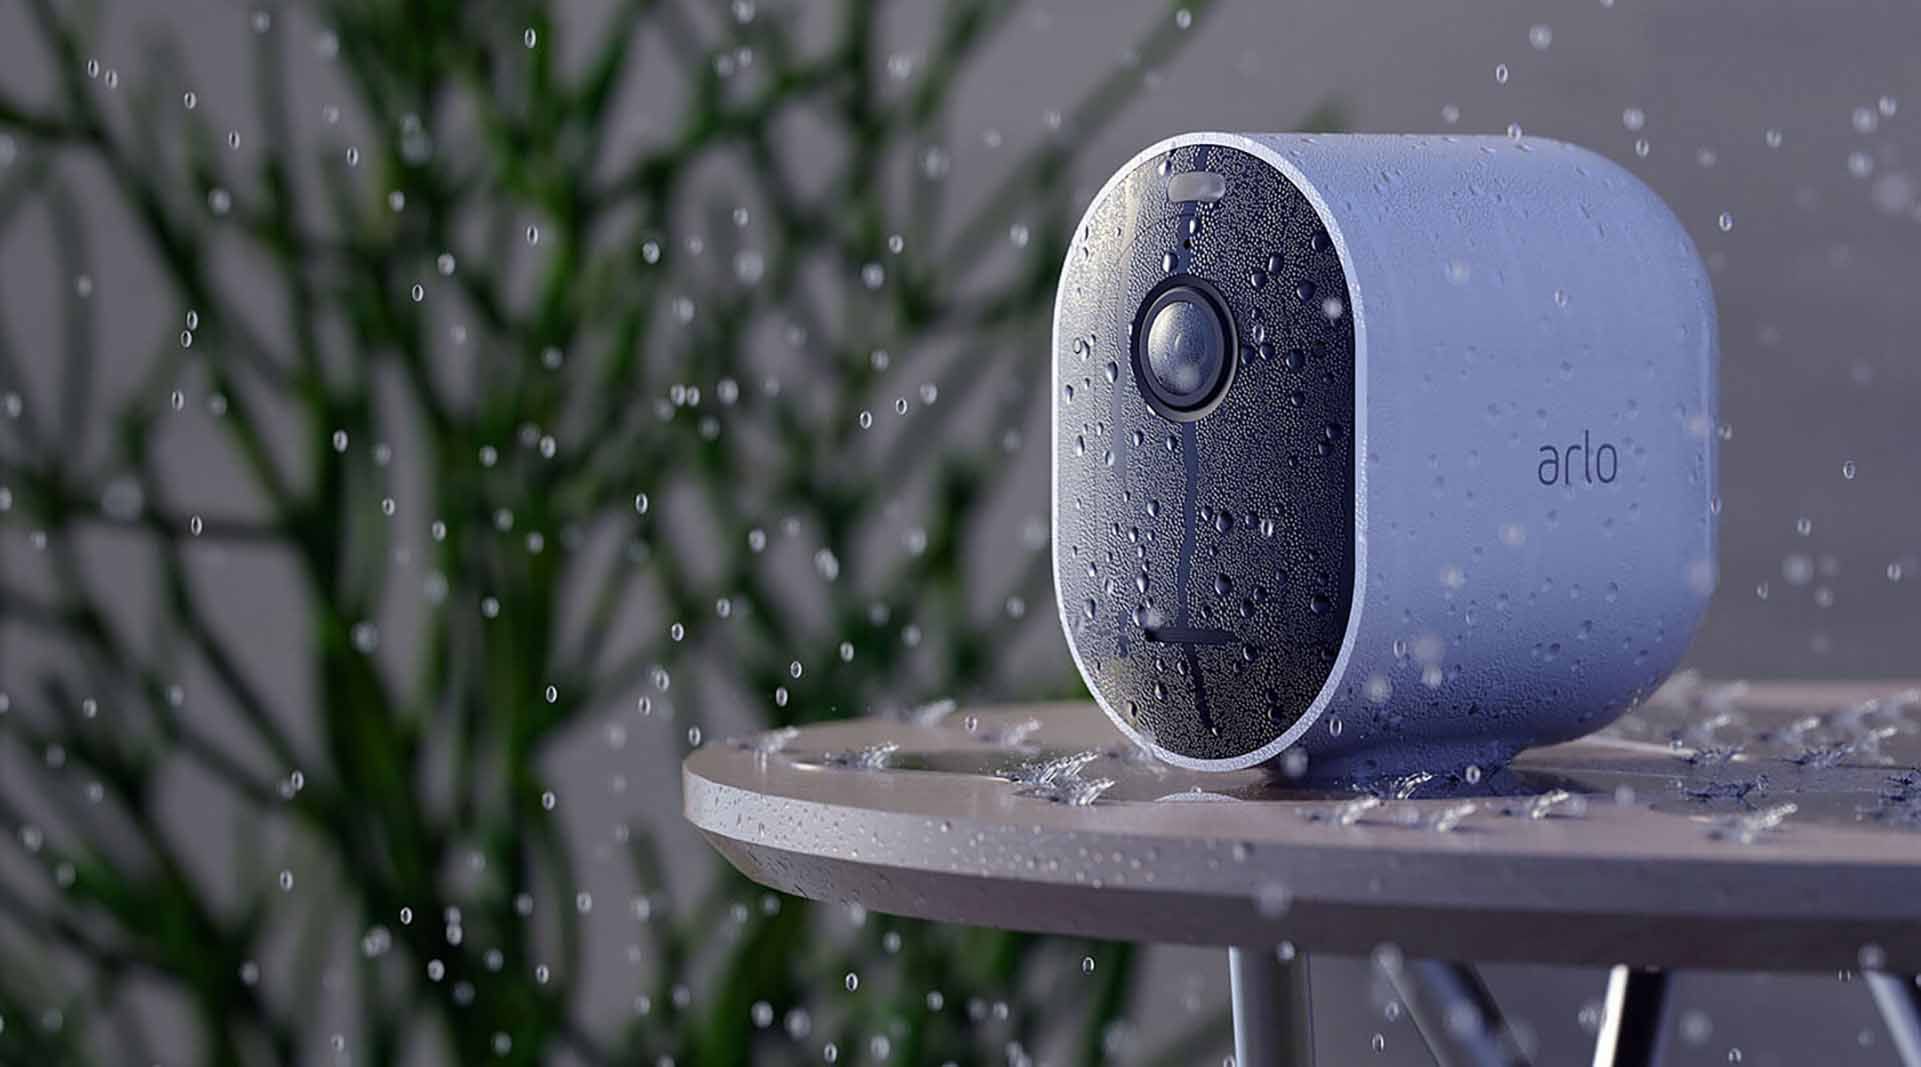 Arlo Pro 4 Spotlight Camera sitting on a surface covered in raindrops.